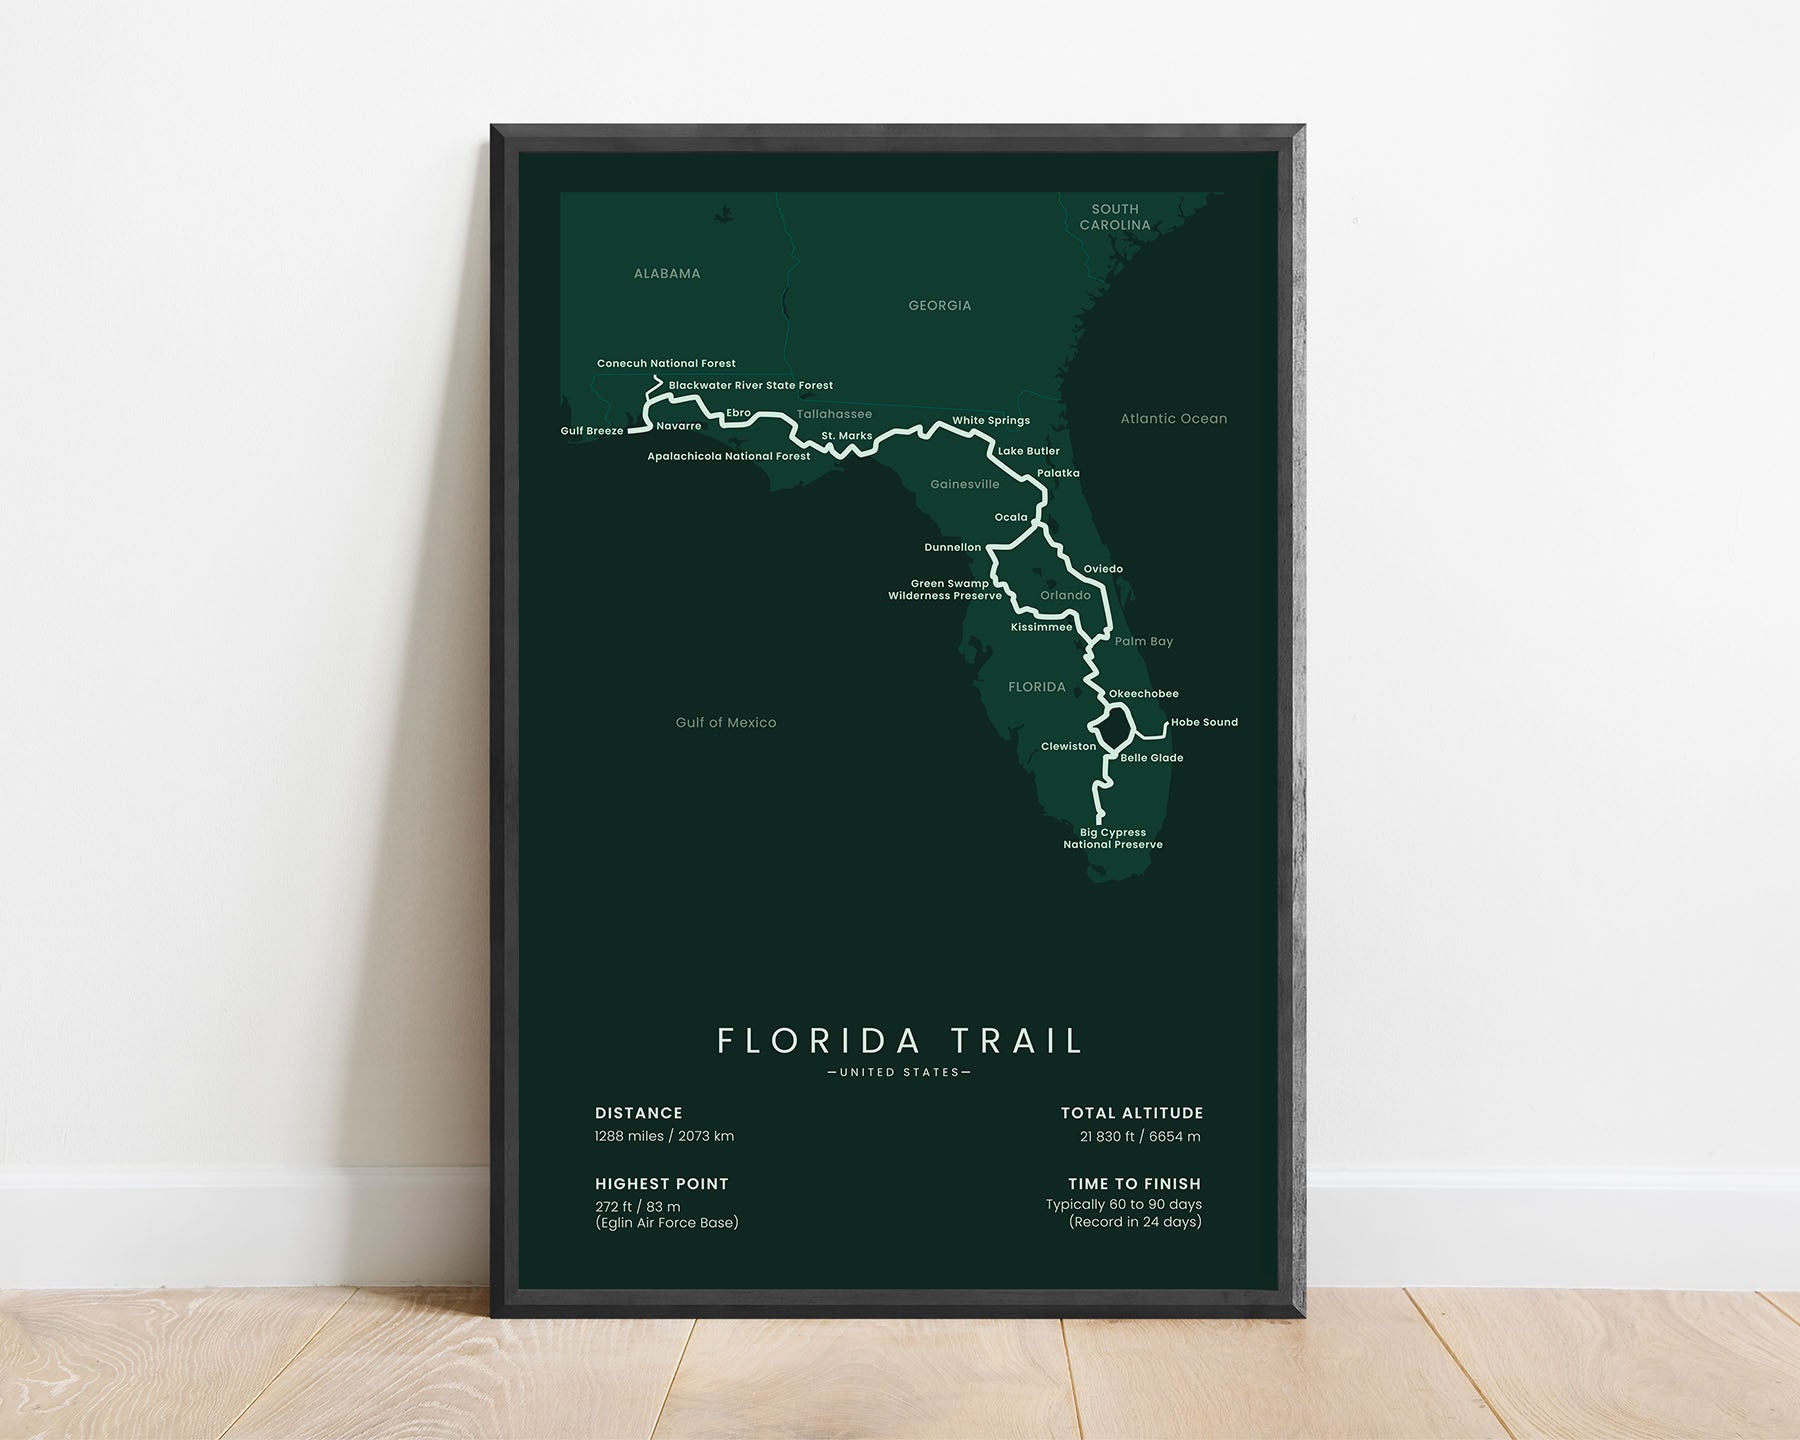 Florida Trail trail map art with green background